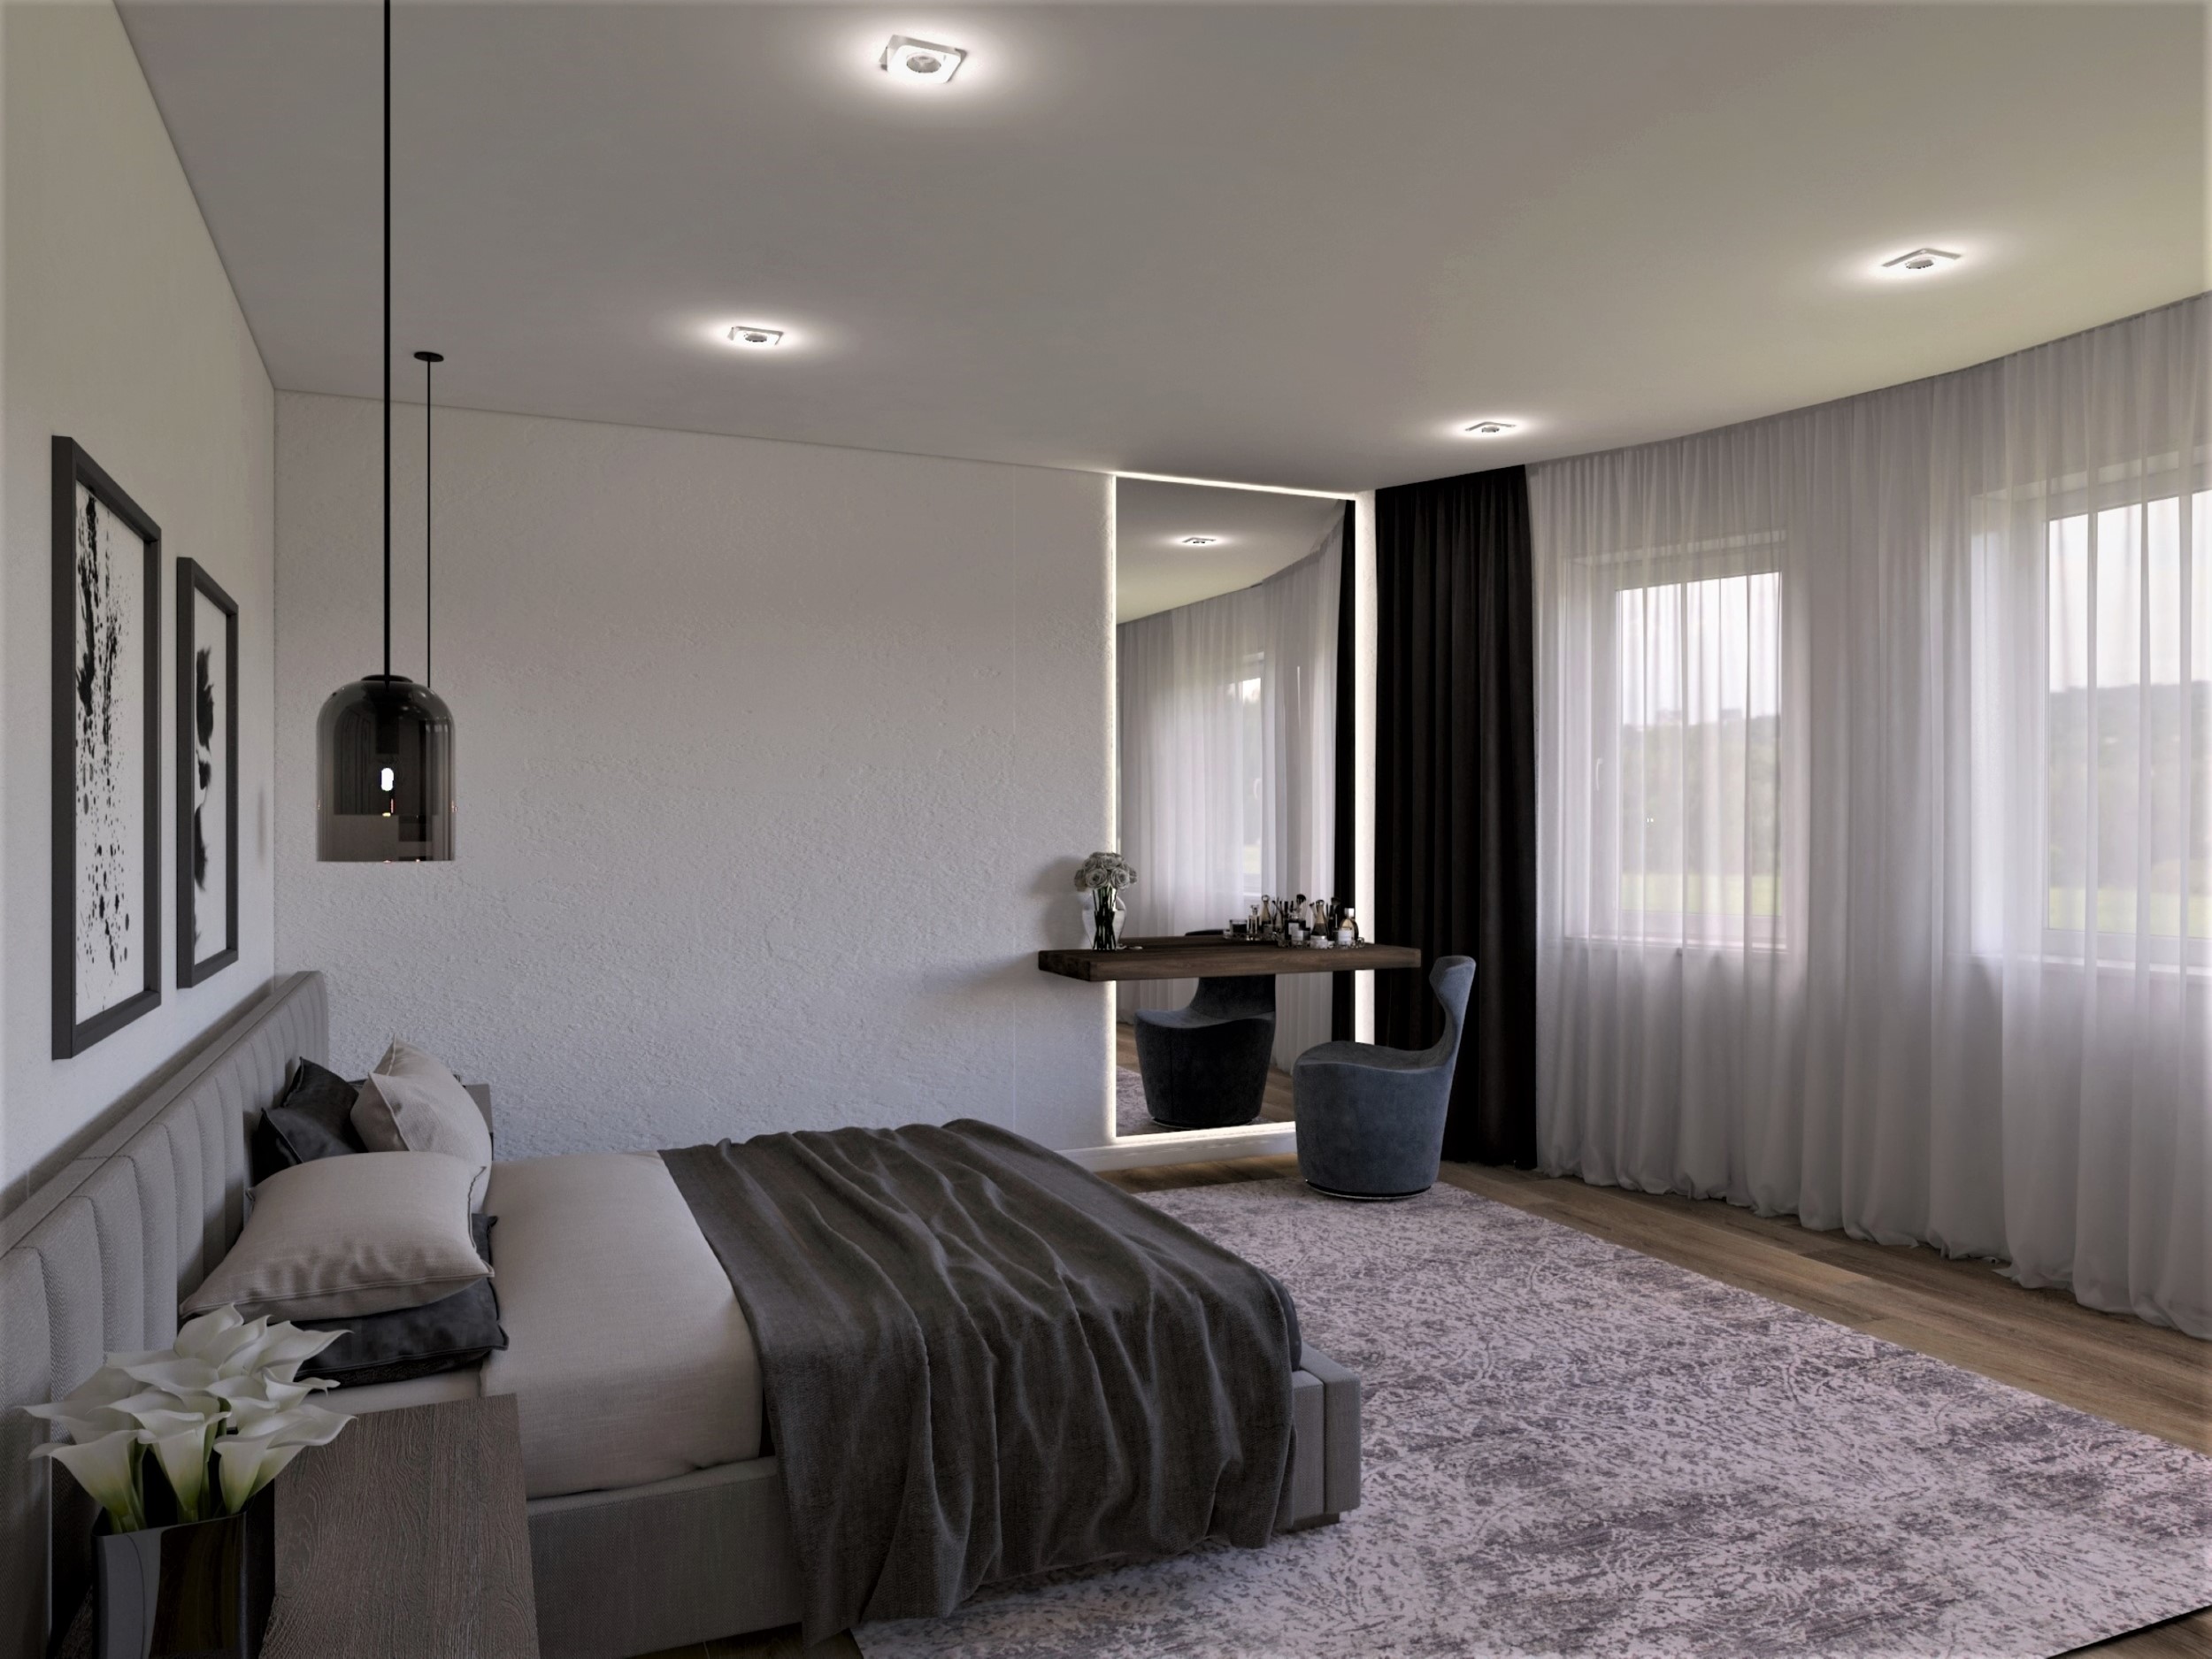 apartment on the Khodynsky field. in 3d max vray 3.0 image